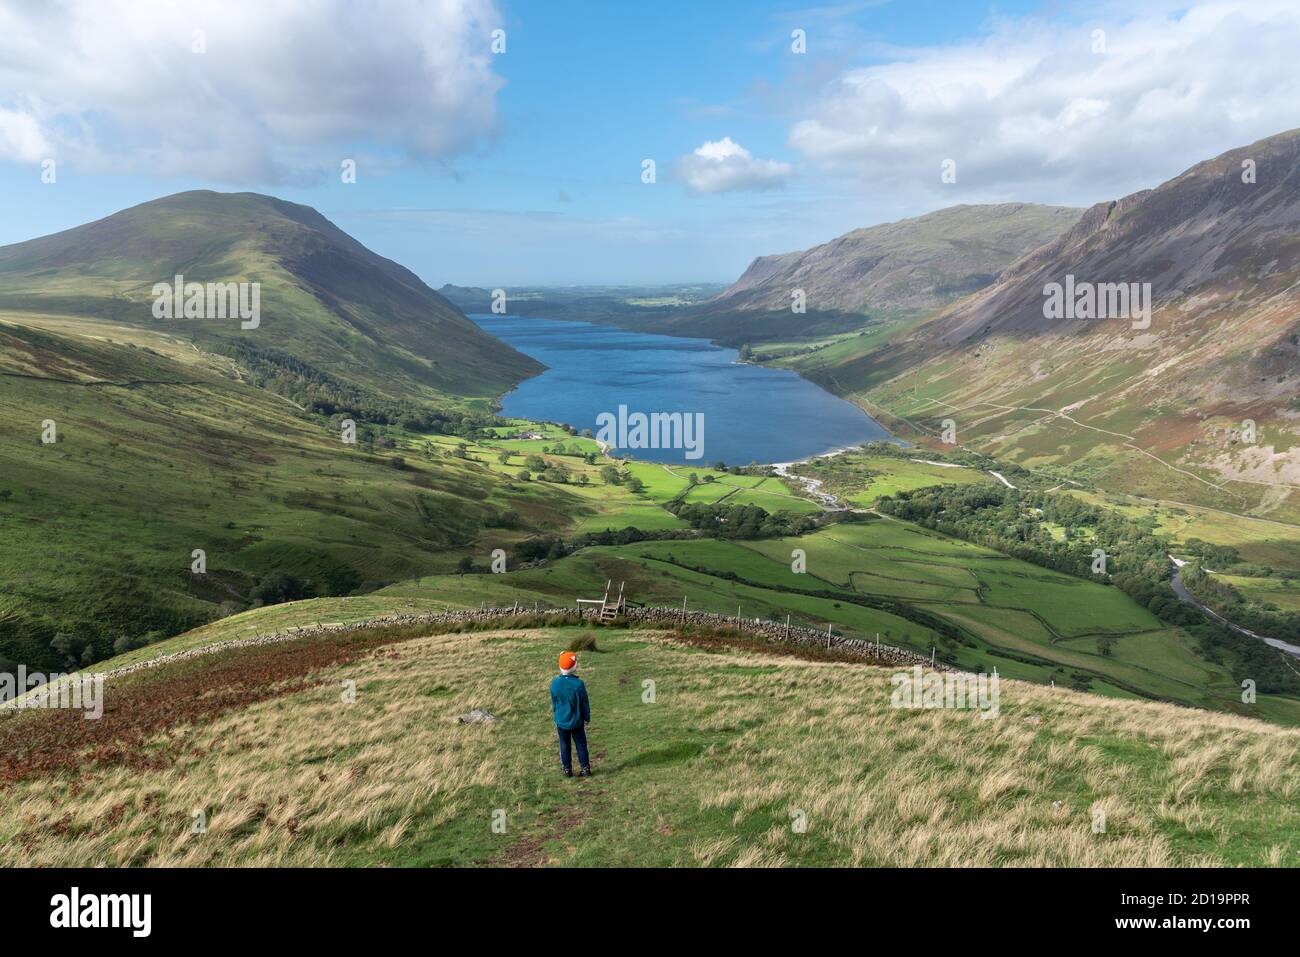 Little boy stood looking at the view from Lingmell across Wastwater Stock Photo